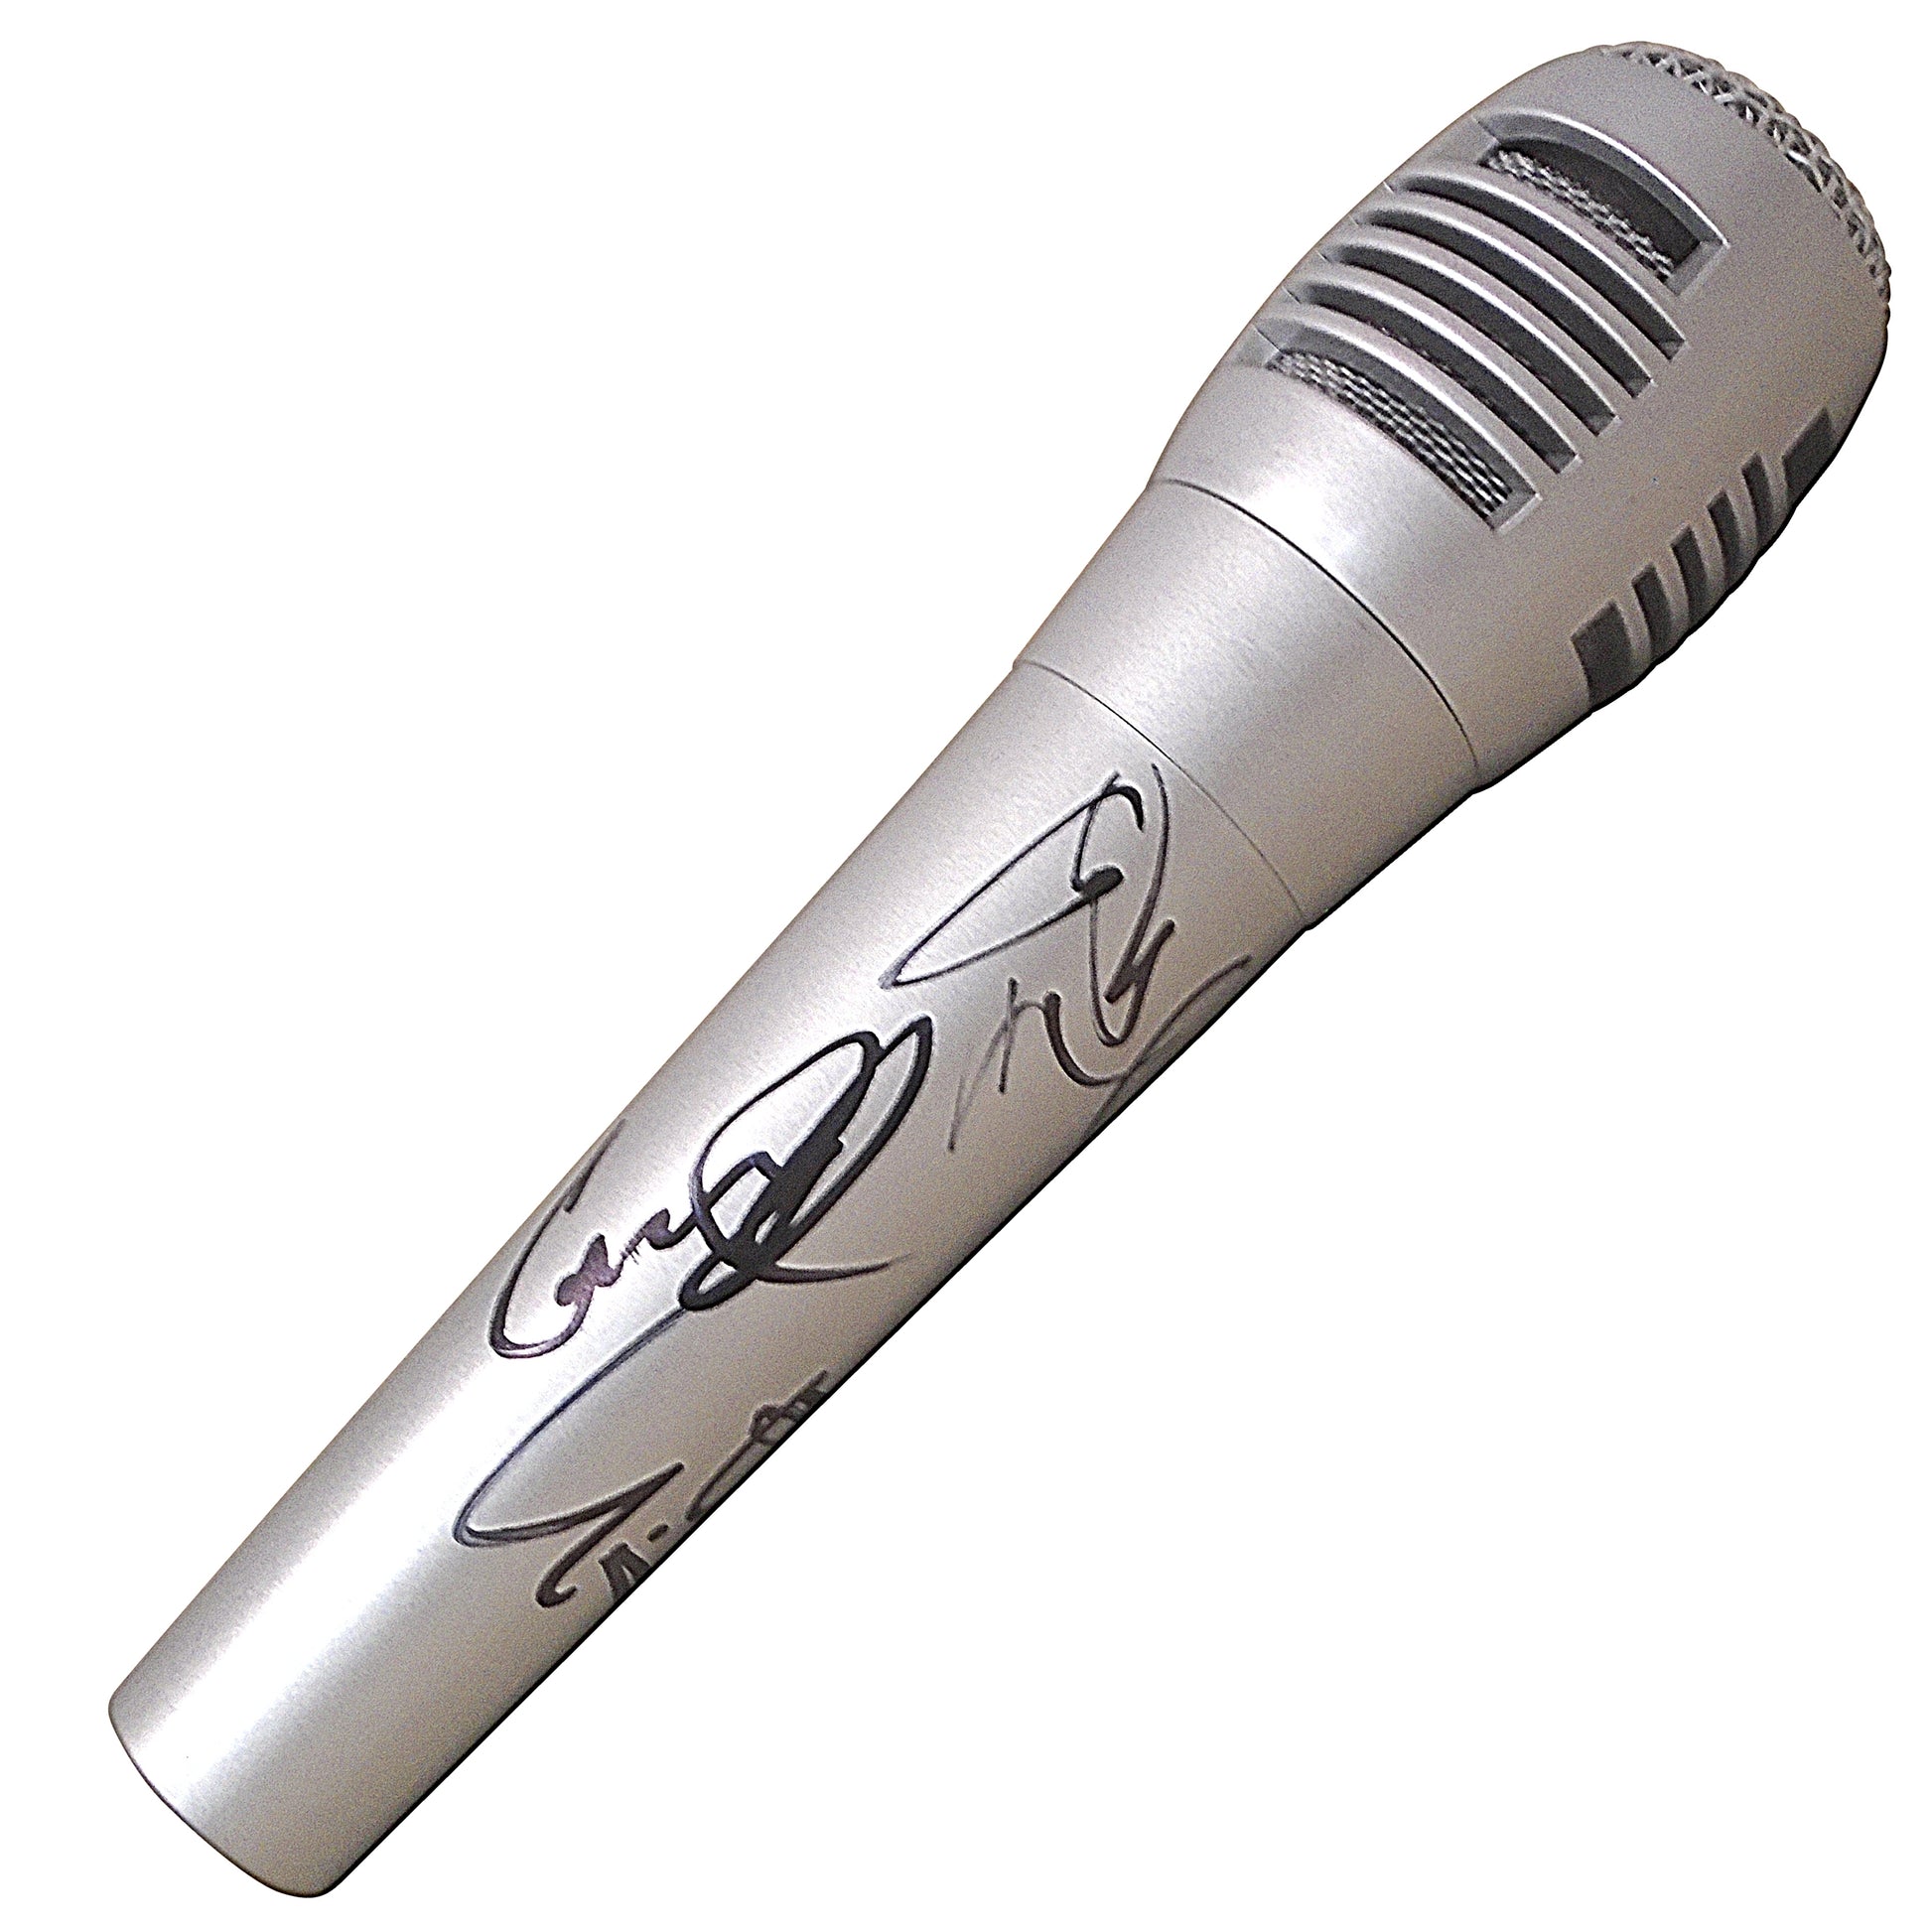 Music- Autographed- A Thousand Horses Signed Pyle Microphone Beckett BAS Authenticated 101